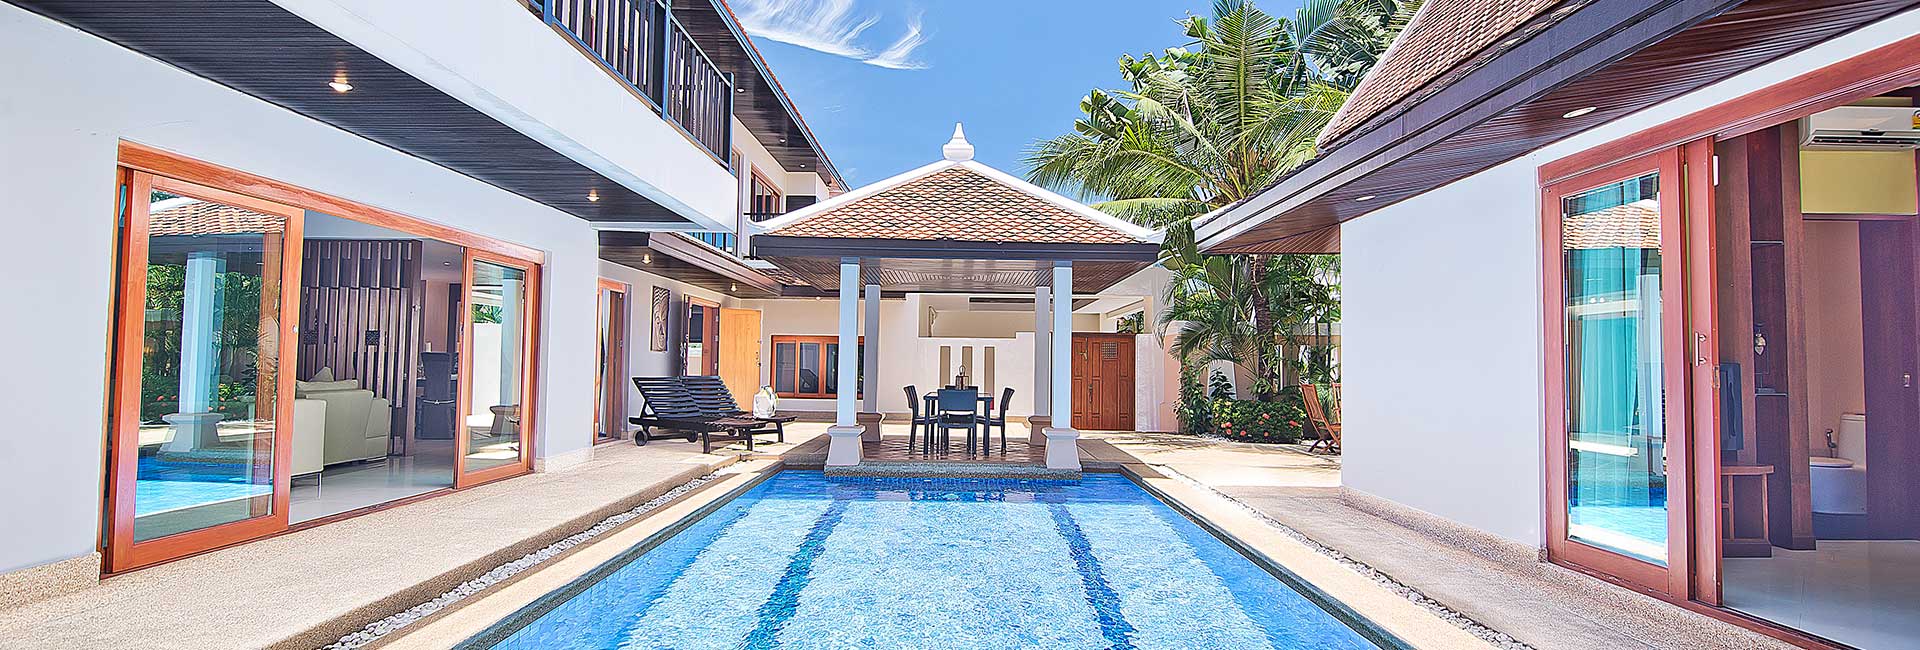 Tropicana Pool Villa : Luxurious tropical houses and villas with pool for  rent in Jomtien Pattaya Thailand